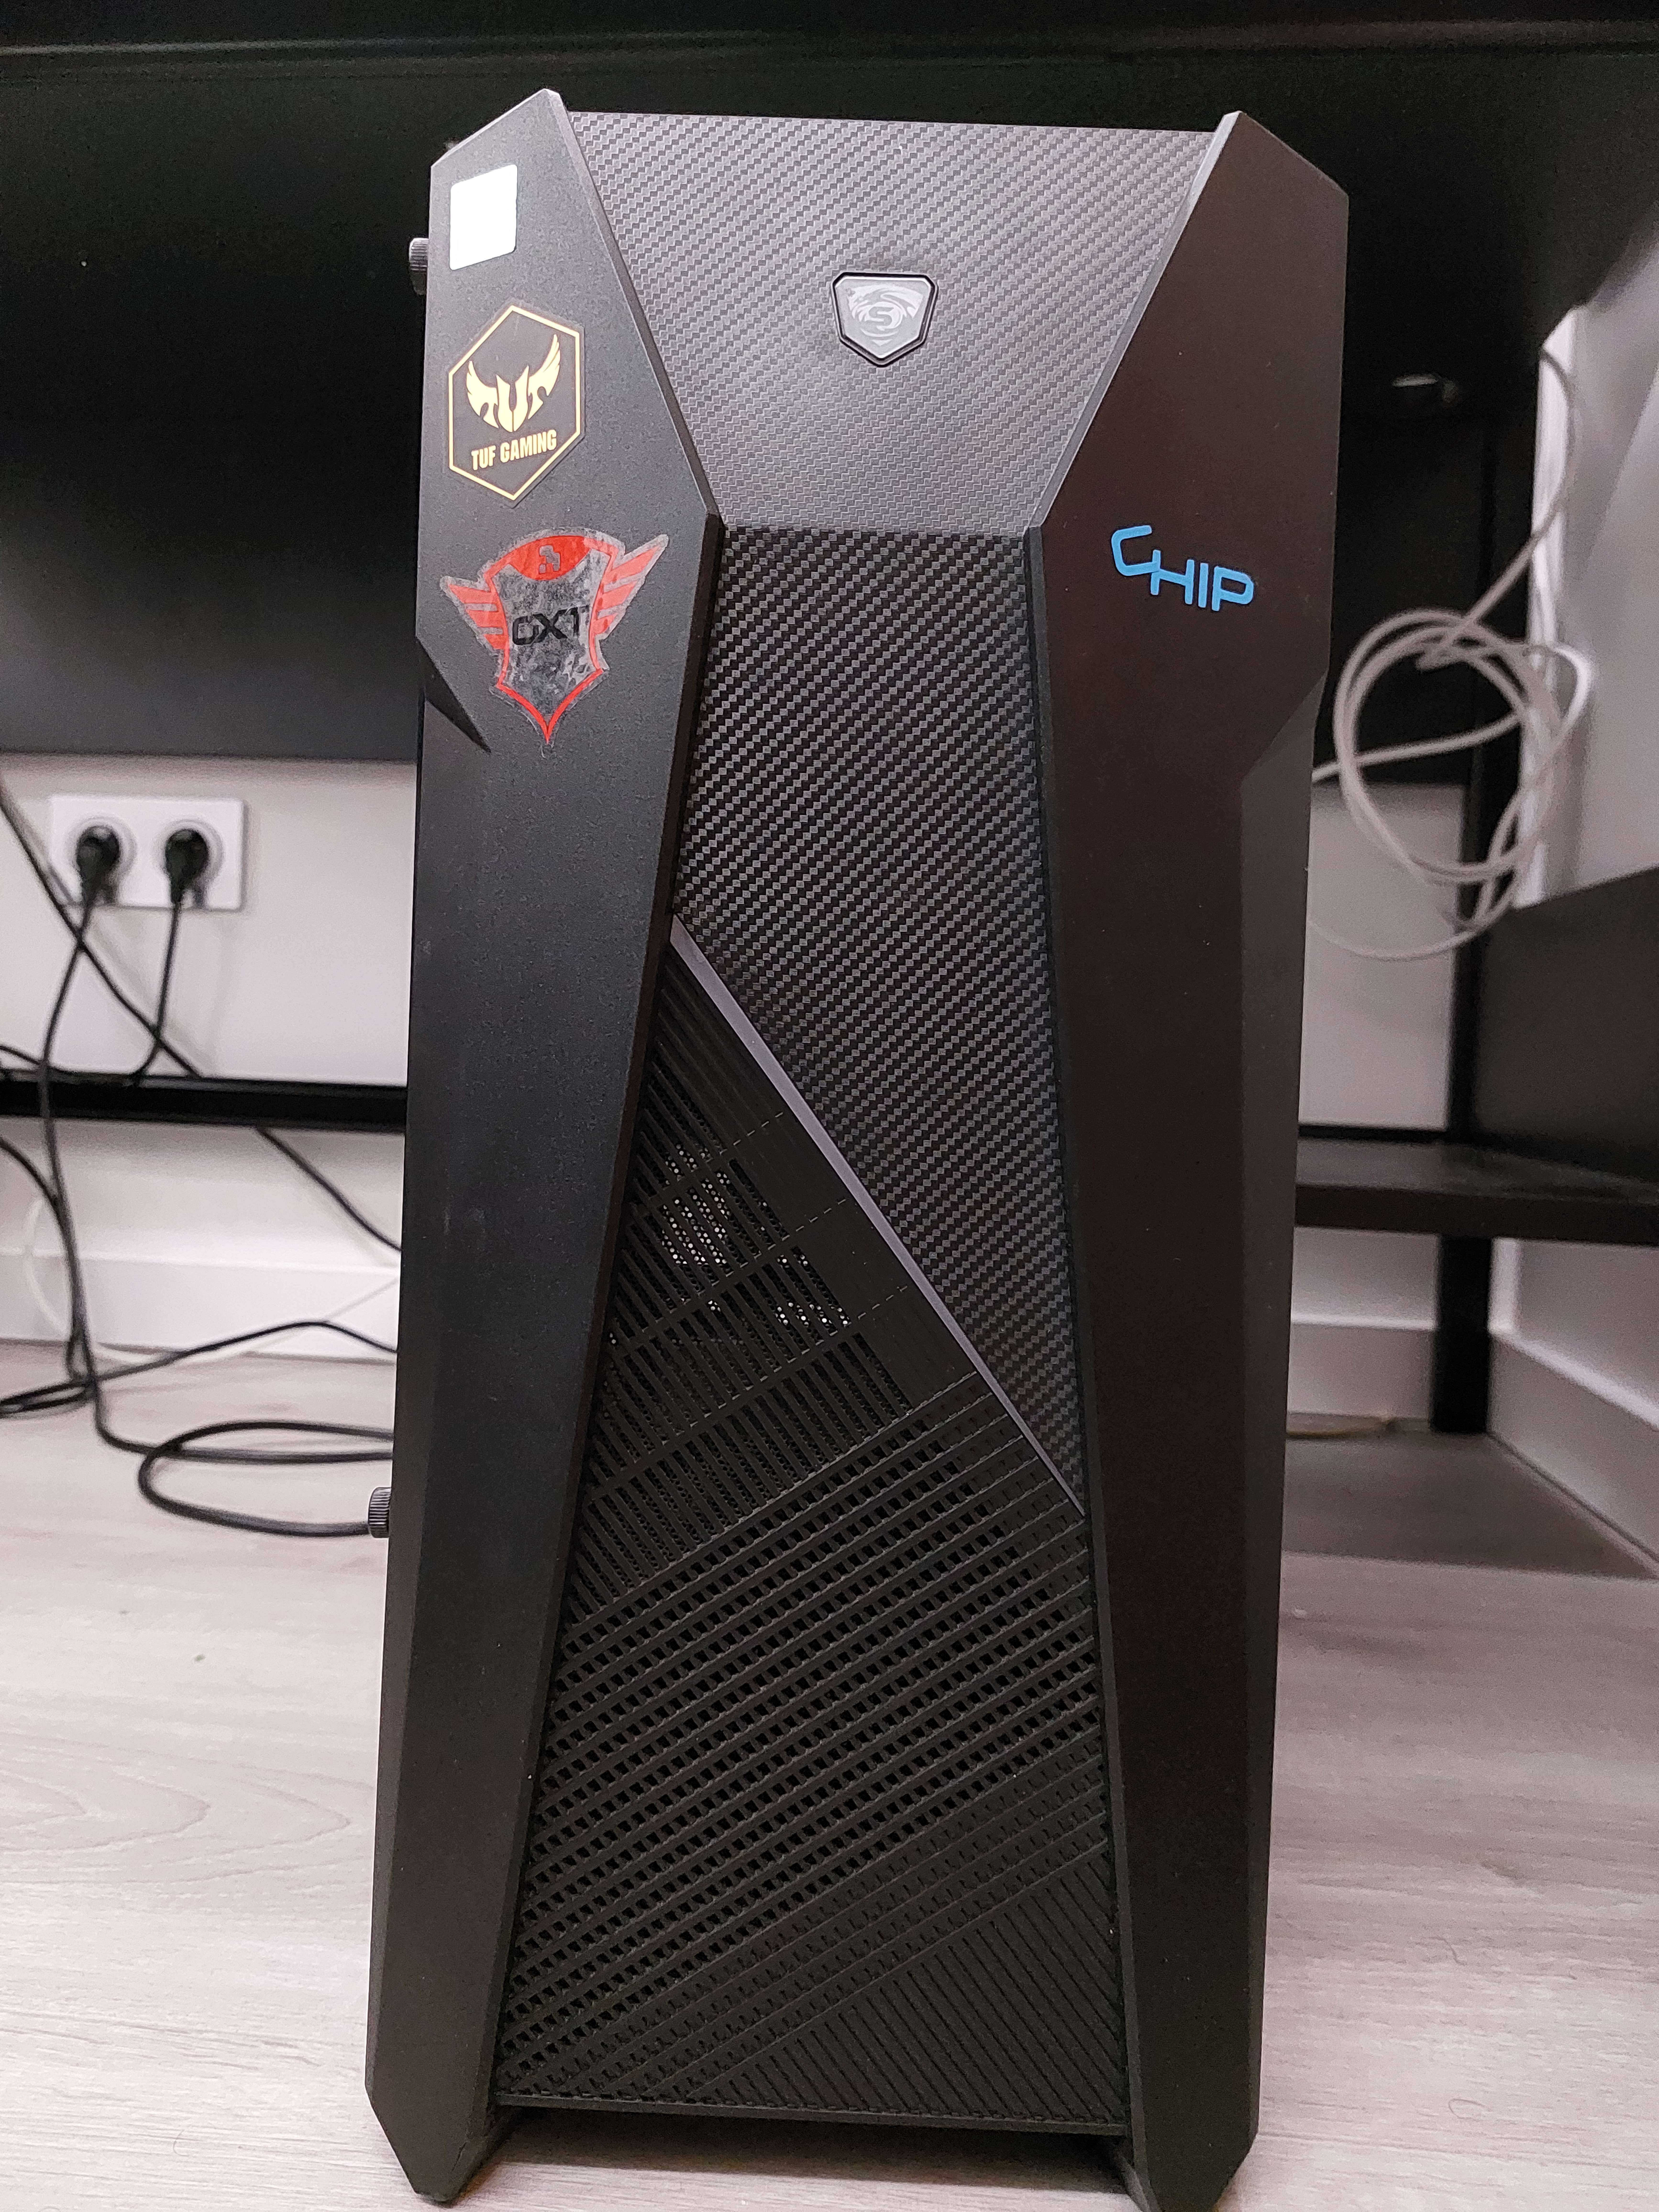 PC Gamer (Torre) - Intel Core i5, RX 580, SSD 500GB + Rato Gaming